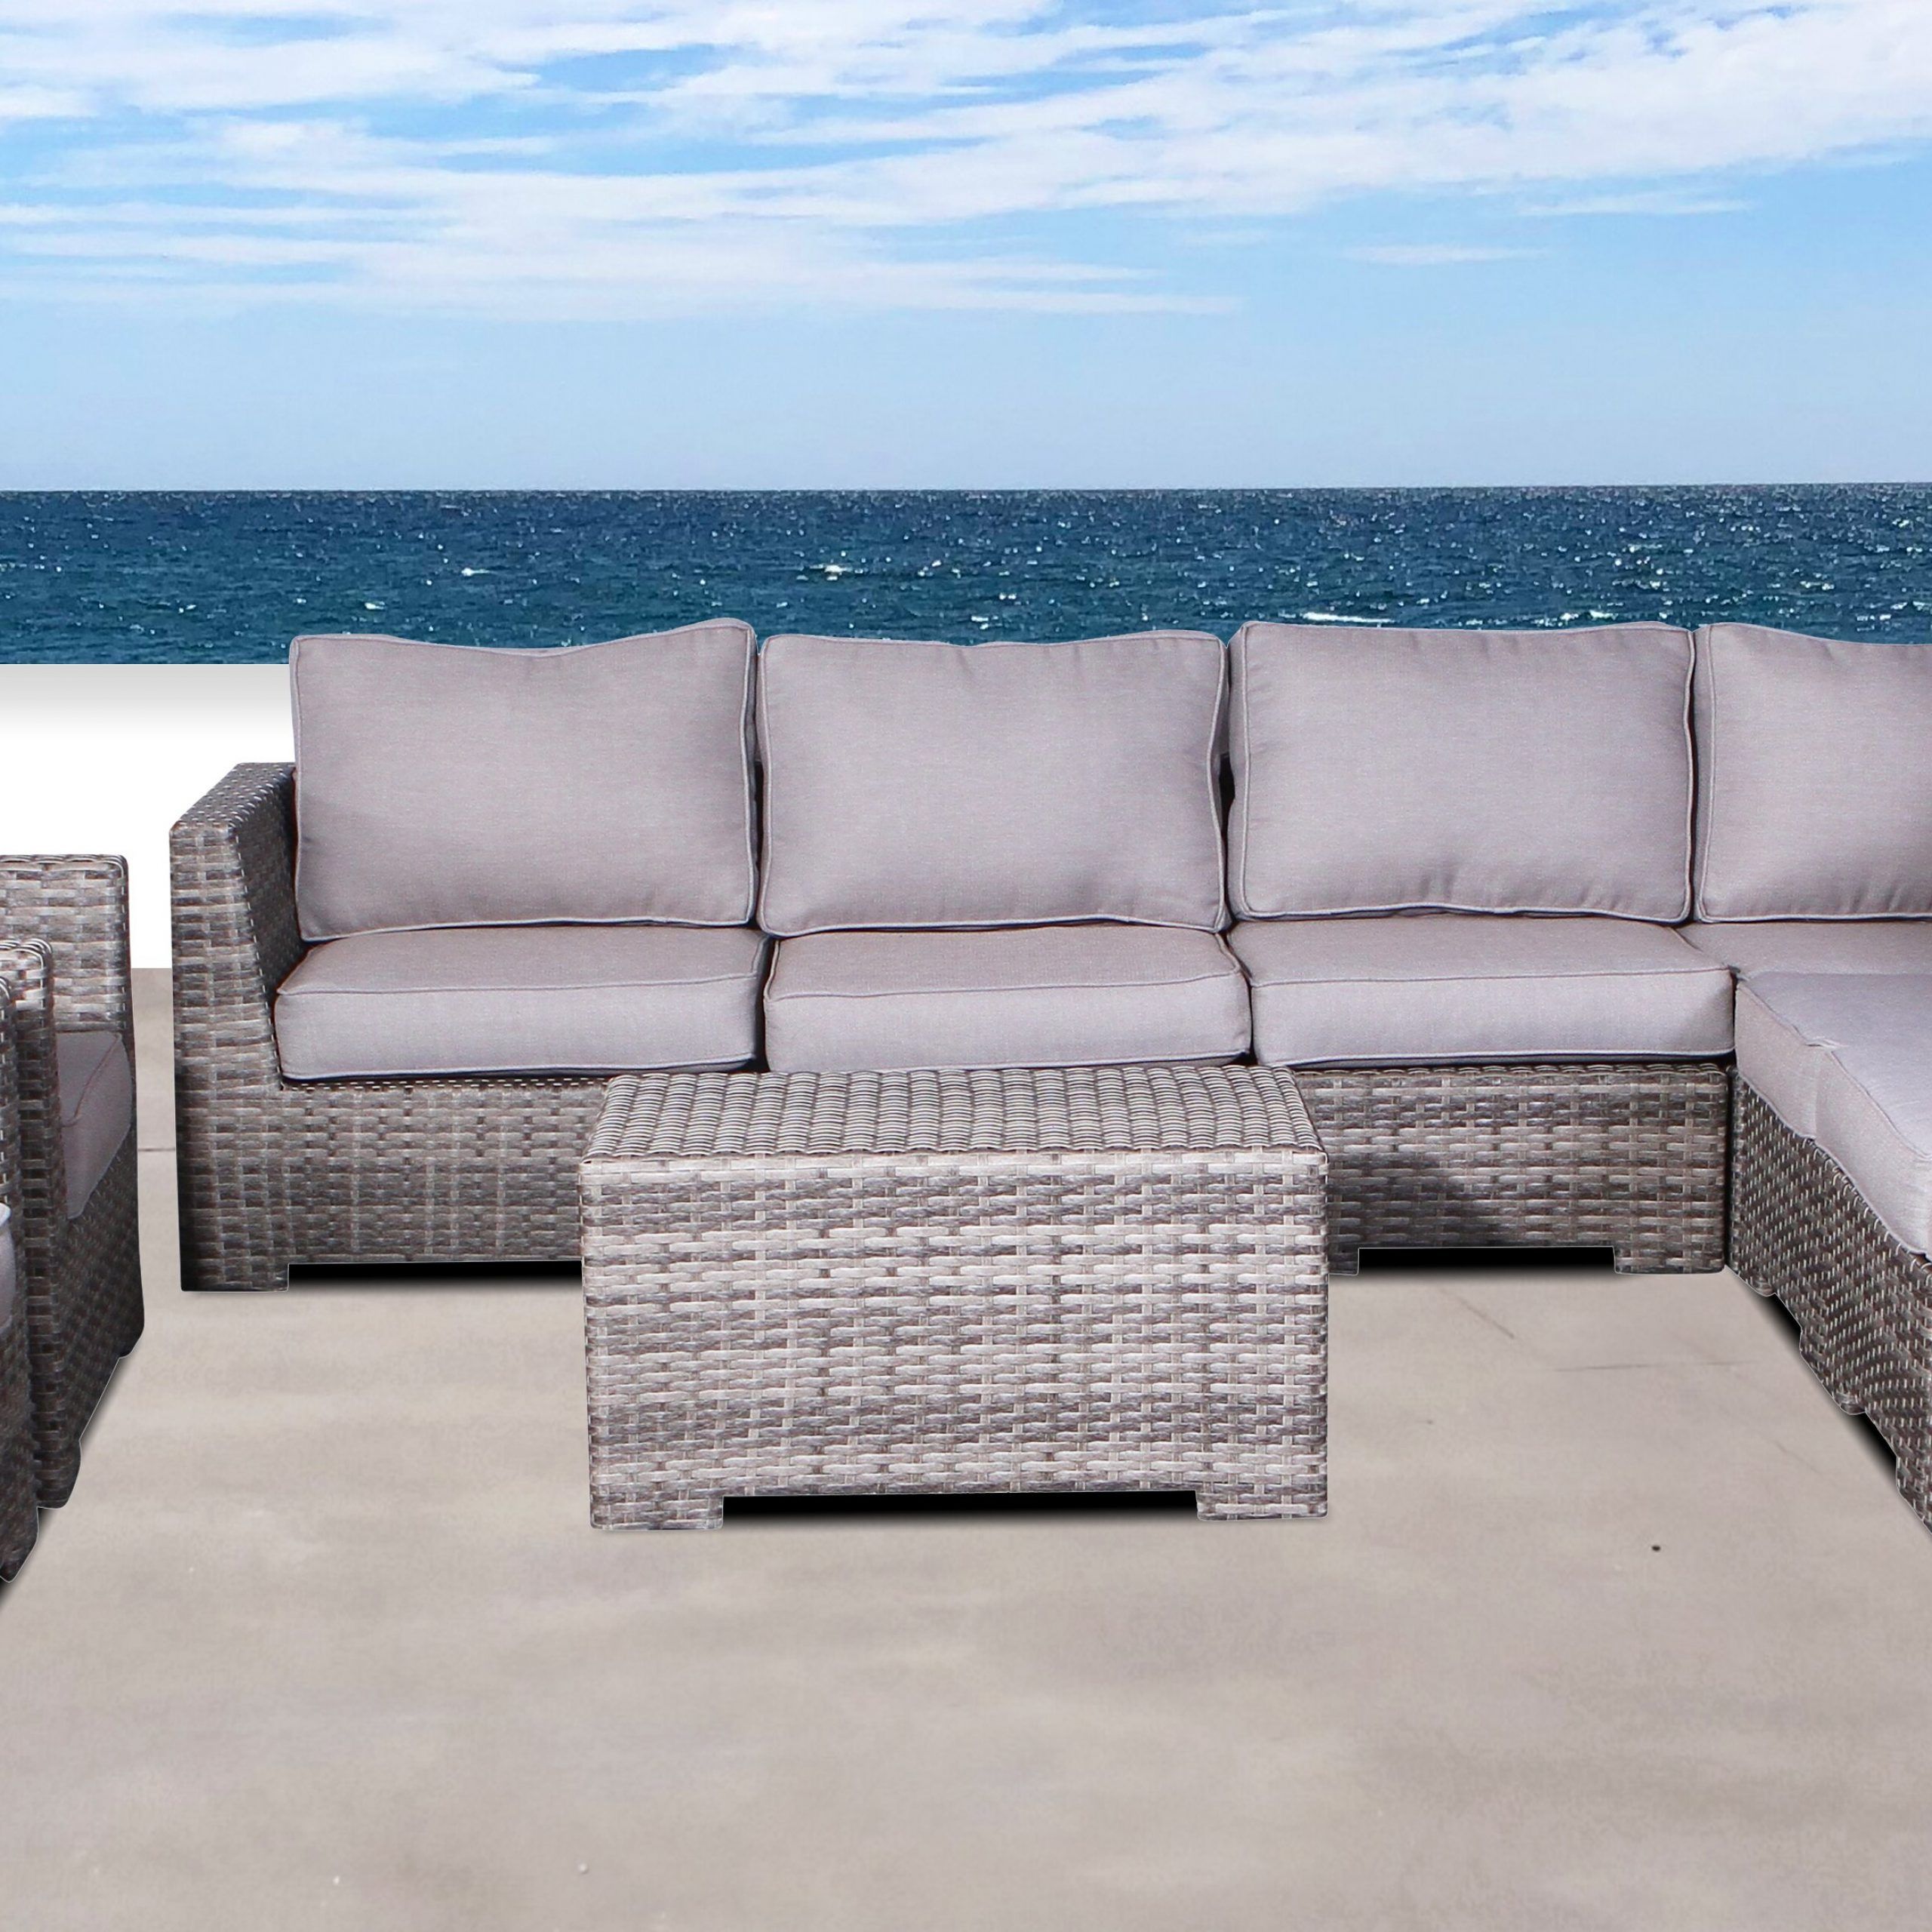 Well Liked Letona Double Club 4 Piece Sectional Set With Cushions Throughout Letona Patio Sectionals With Cushions (View 4 of 25)